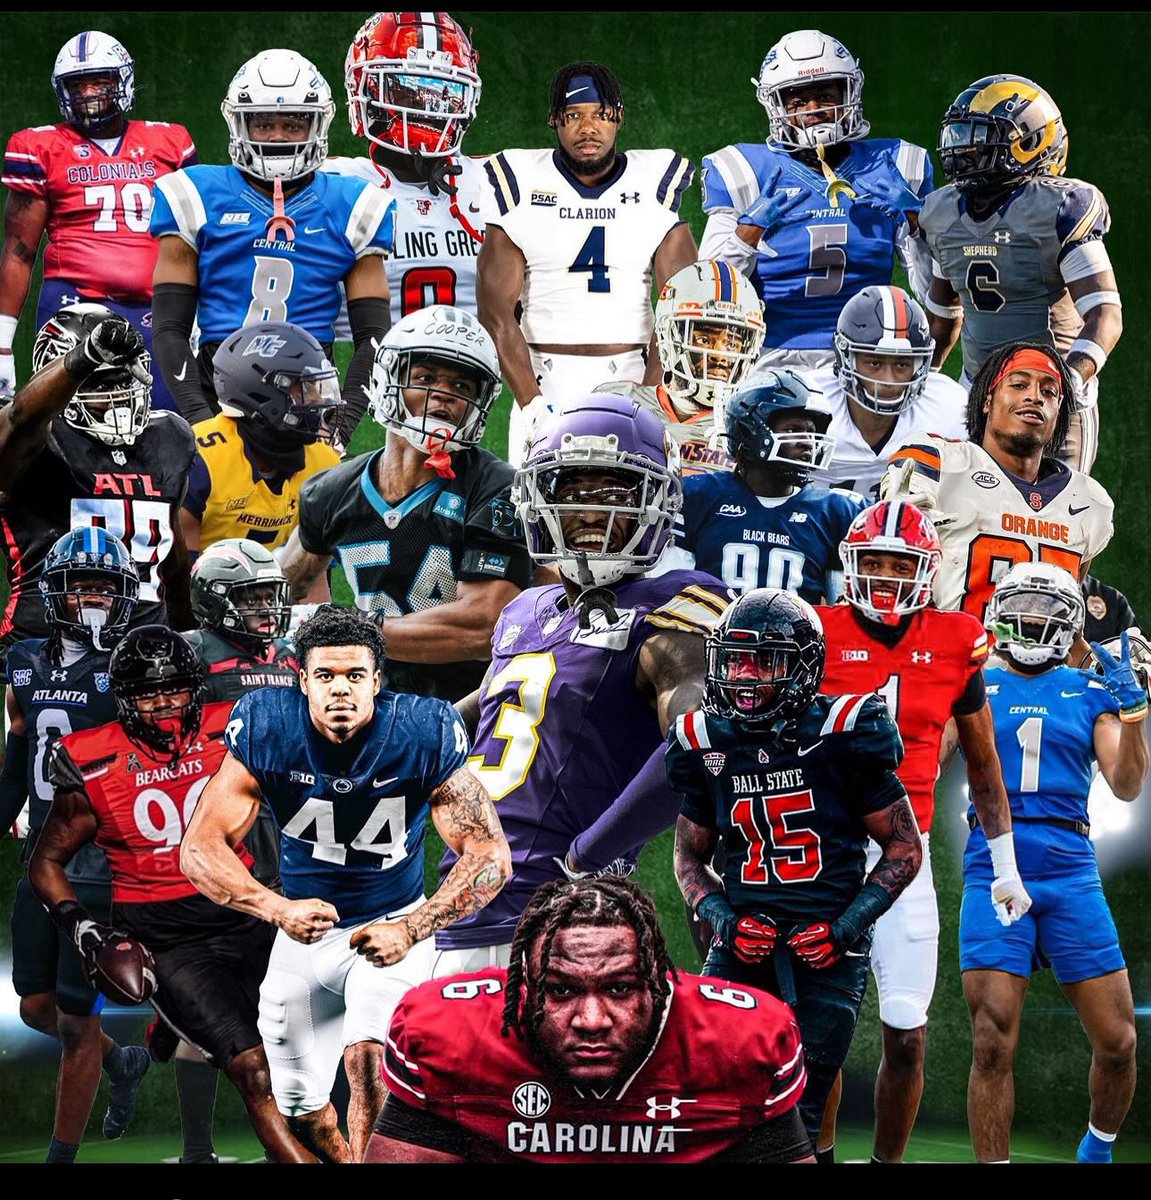 Moco fball clinic ! Coached by some of the best! docs.google.com/forms/d/e/1FAI… @CSconnect_MCPS elementary link @OSTMontgomery @KADEN3TIMESSS @quez__15 @kxngdono @Khalil_That_Man @DariusLorfils @PKikwata3 @_dcoop1 @plat02_ @_2trilll @SmileyGotSauce @DB_Dreis7 @ChristianDHayes